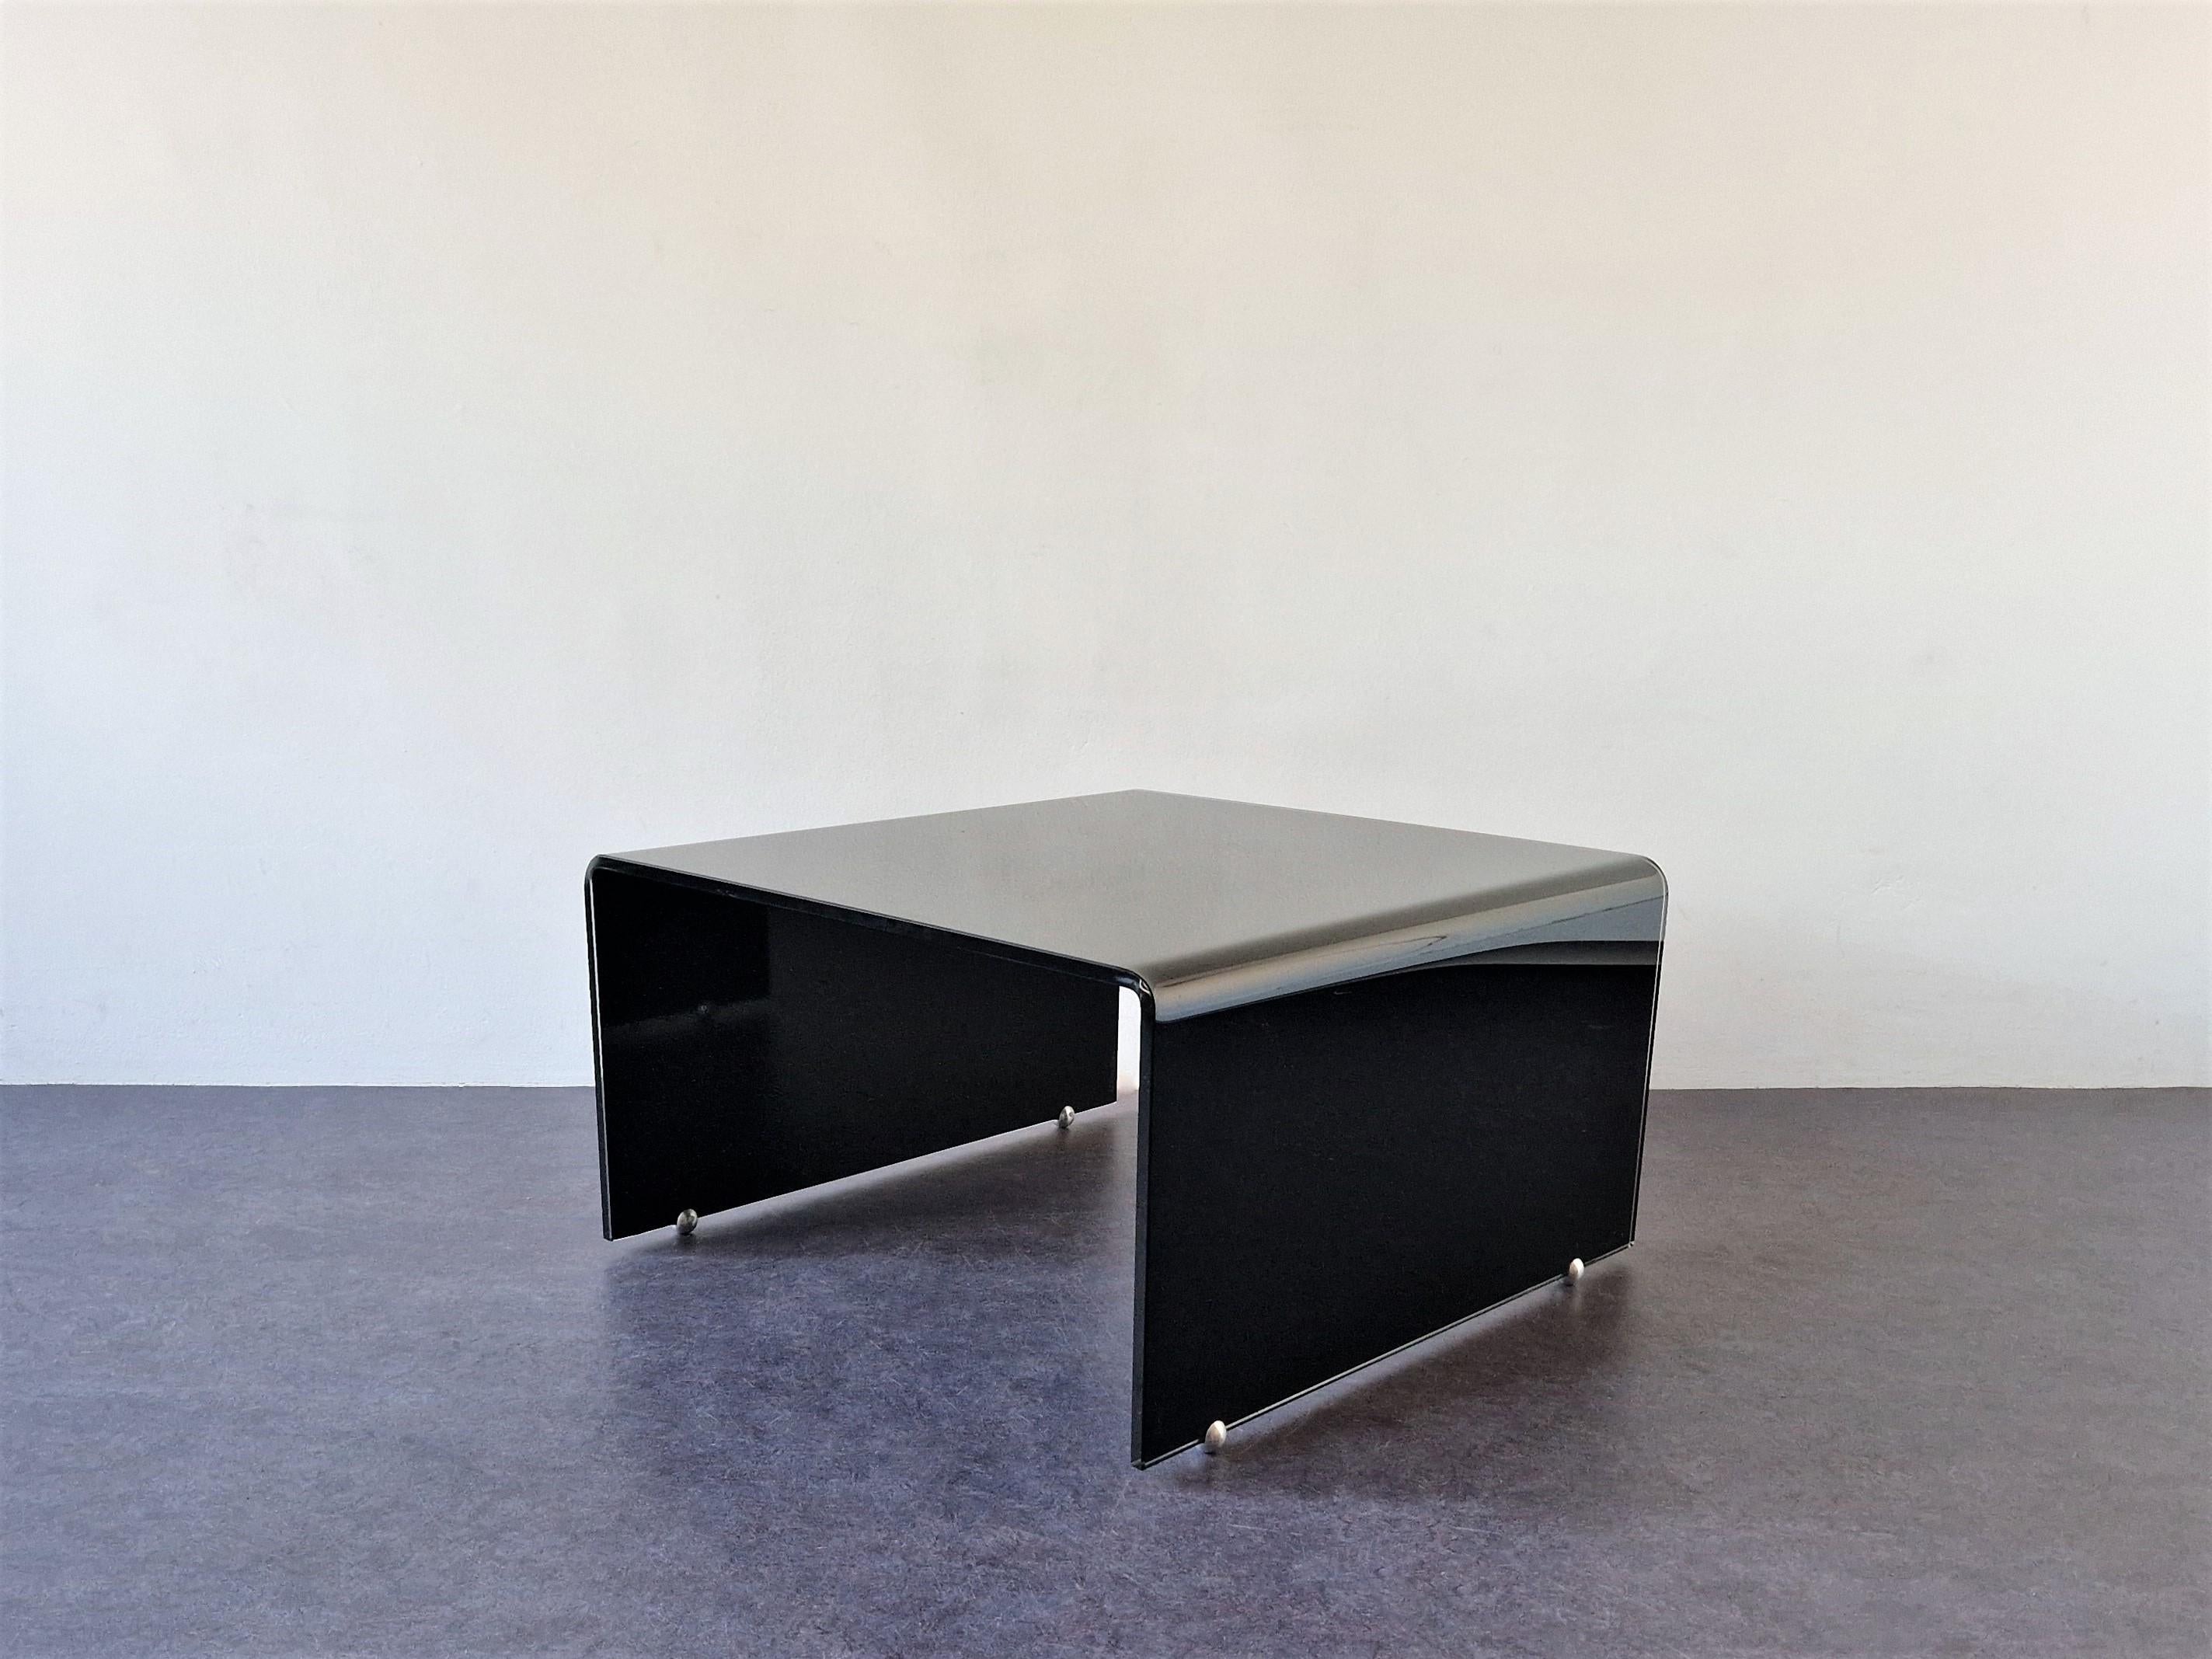 This black glass coffee table is made out of 1 piece of curved glass. It has 4 aluminum ball shaped feet that can be taken of. The aluminum parts make these tables even more stylish and elegant. A beautiful minimalistic design that has obvious